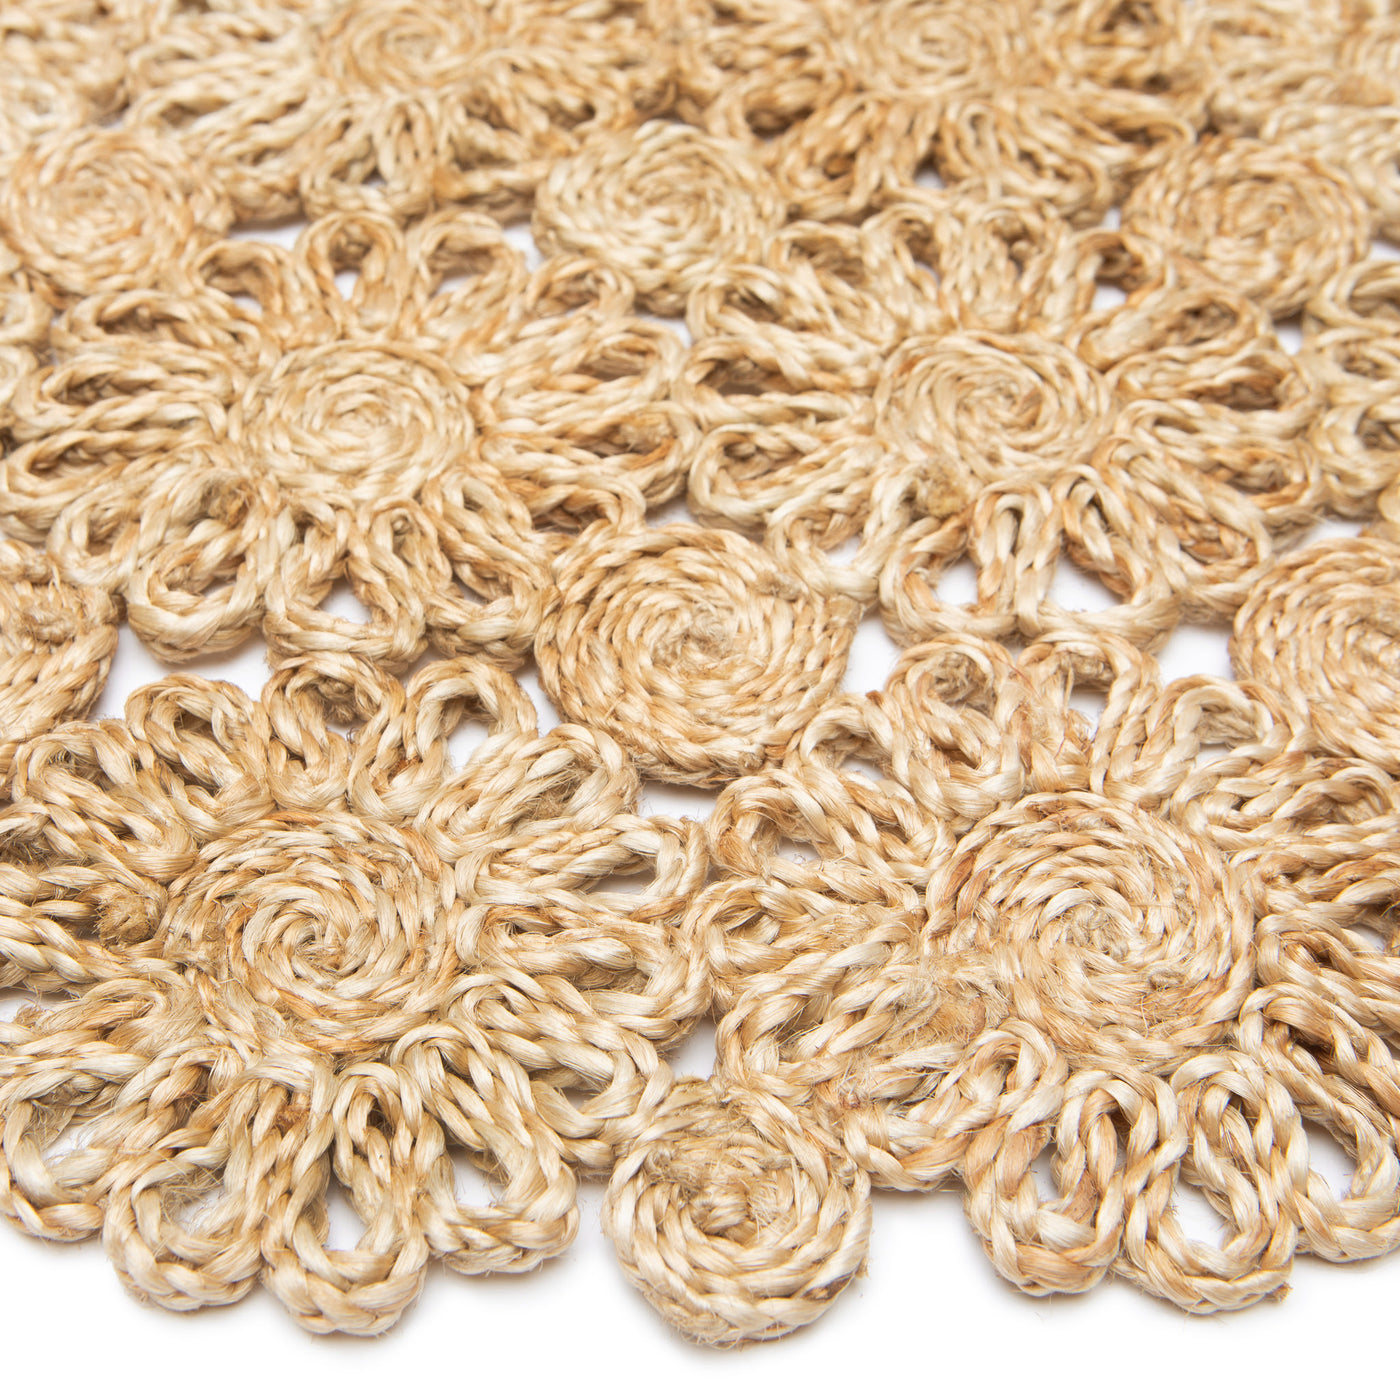 Daisy Jute Natural Placemat 15" Round - Set of 4